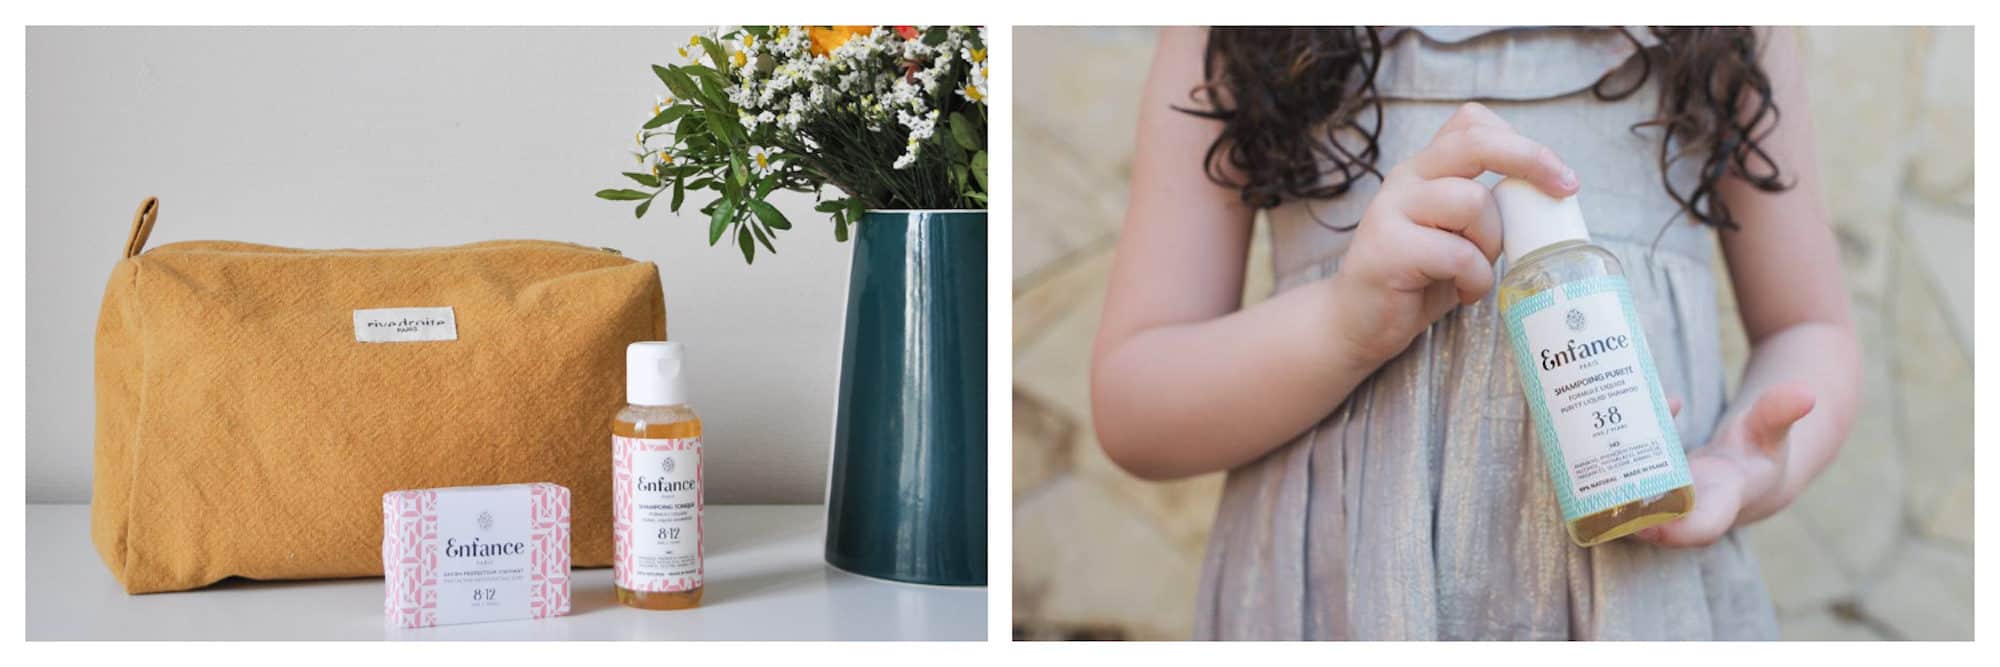 Enfance is one of our favorite French beauty brands for its organic, family-friendly, made-in-France products. 